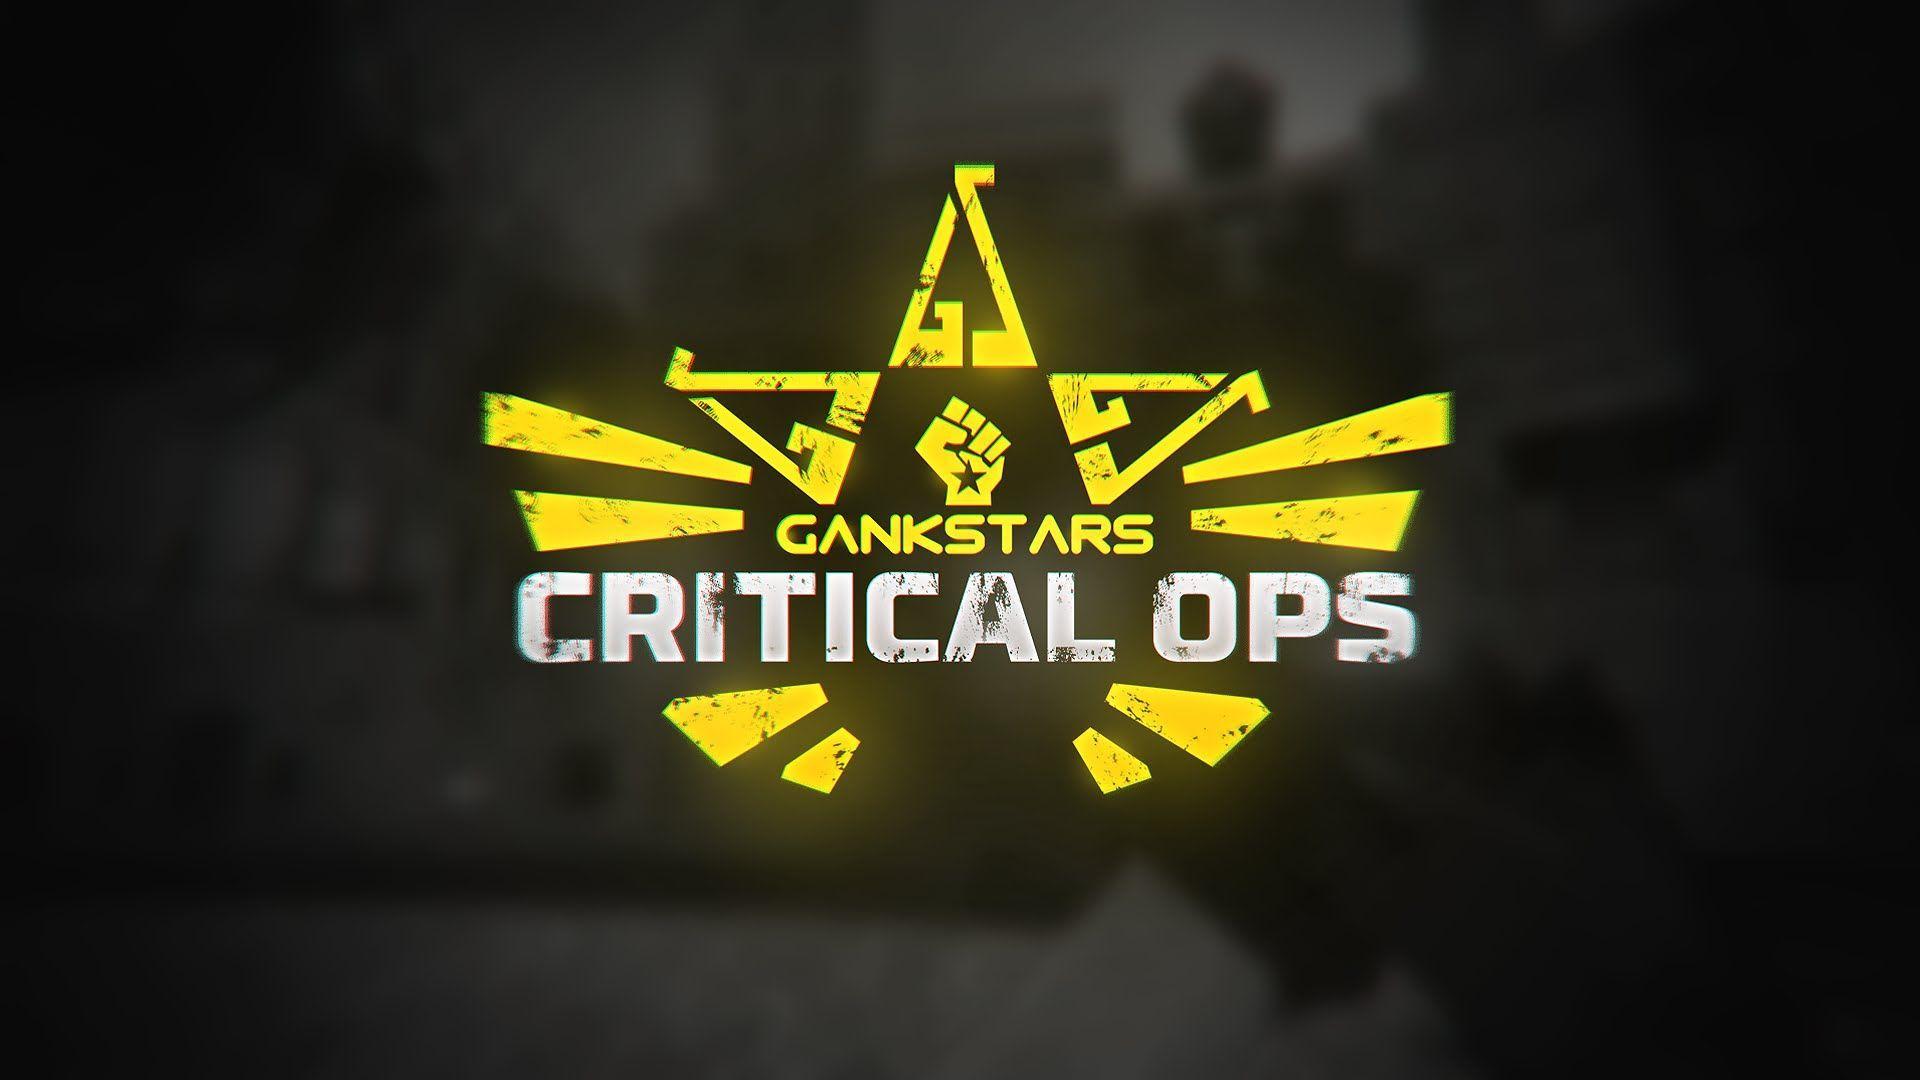 critical ops wallpaper for phone